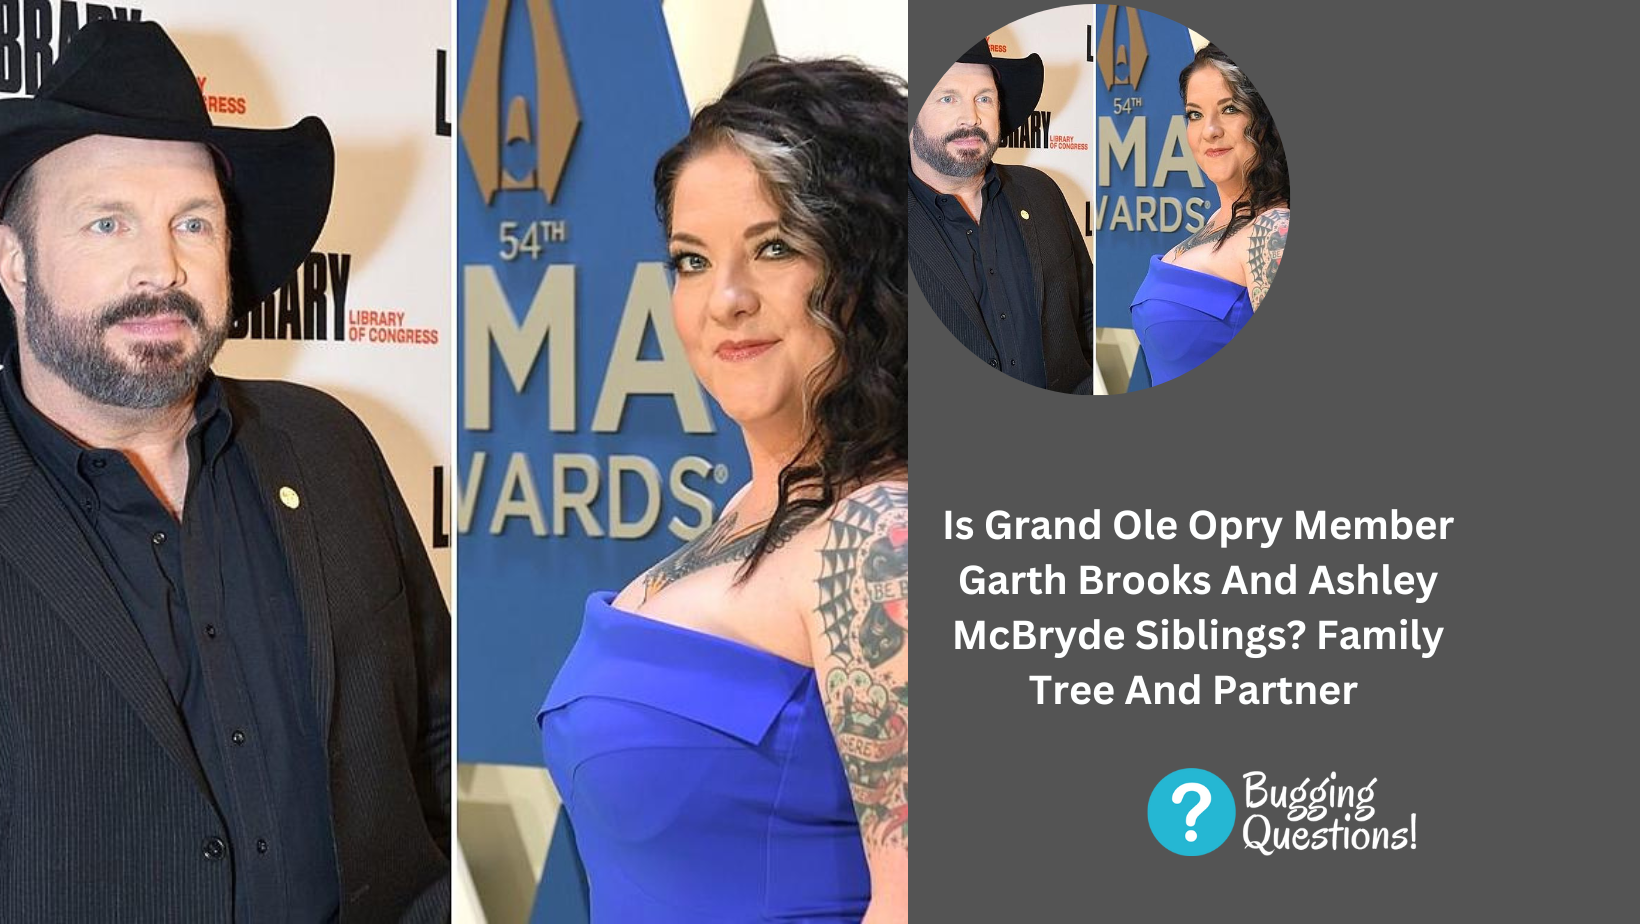 Is Grand Ole Opry Member Garth Brooks And Ashley McBryde Siblings? Family Tree And Partner